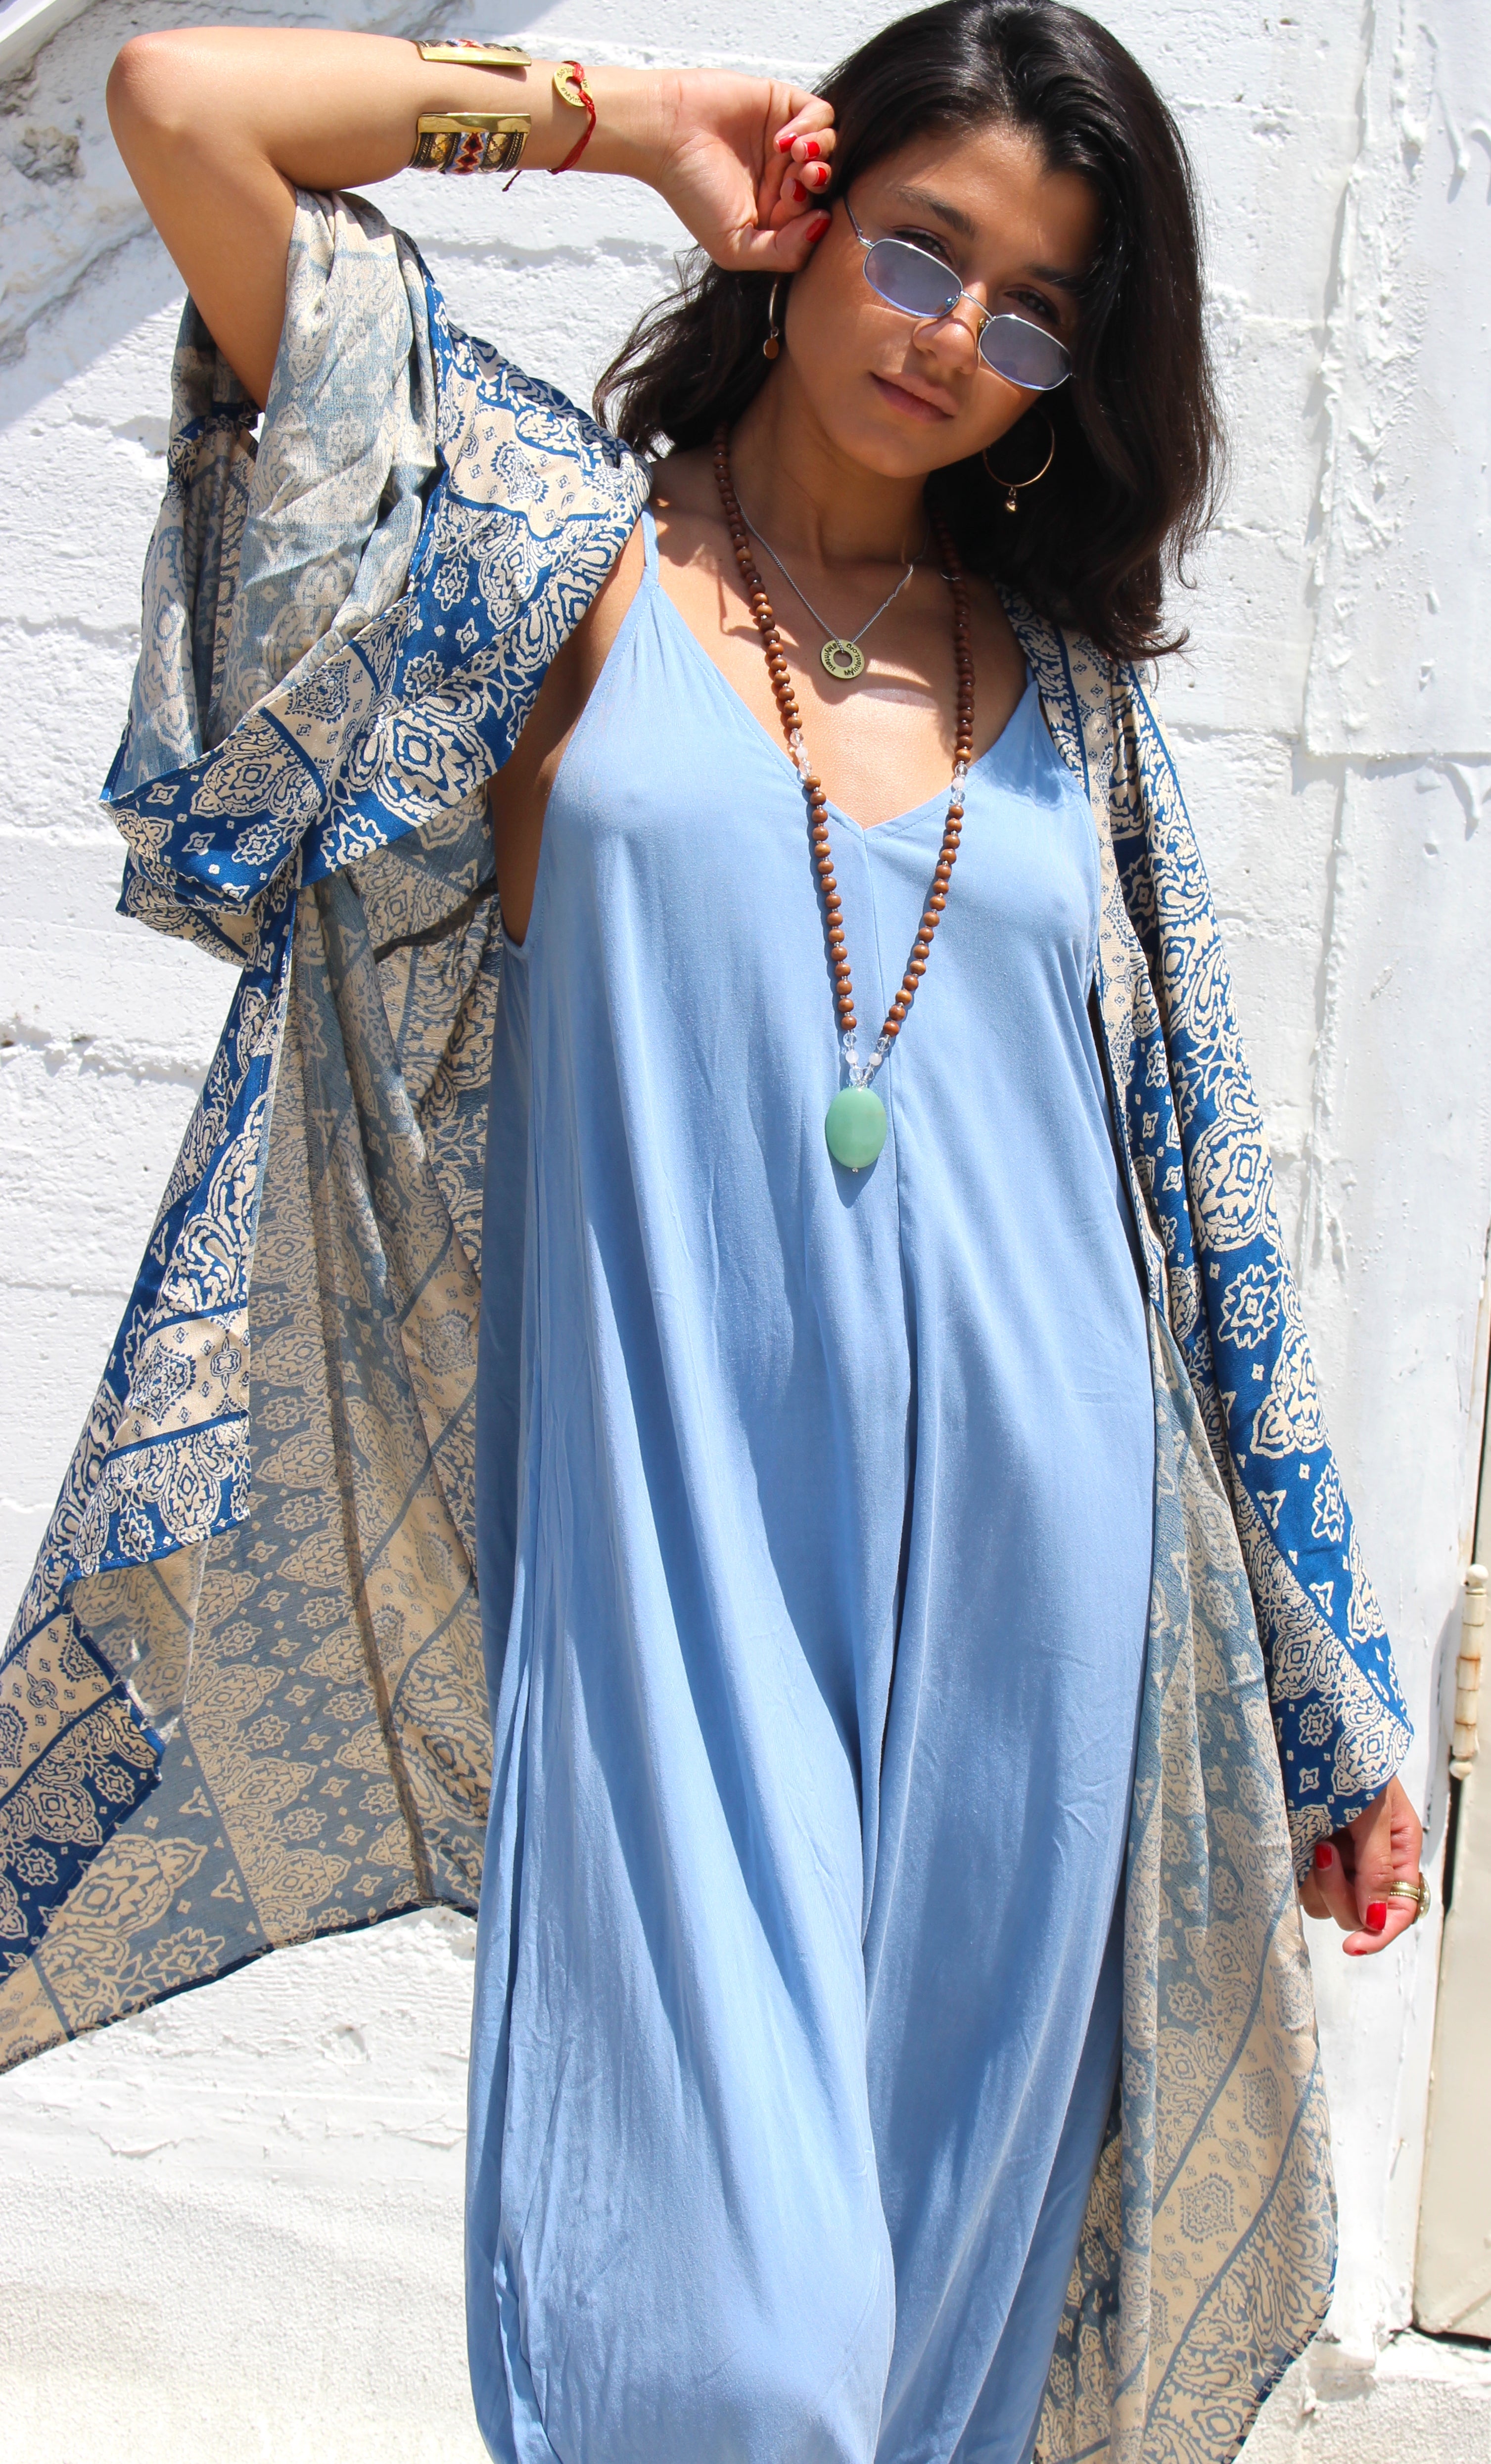 Blue Mantra Kimono - Yoga Clothing by Daughters of Culture